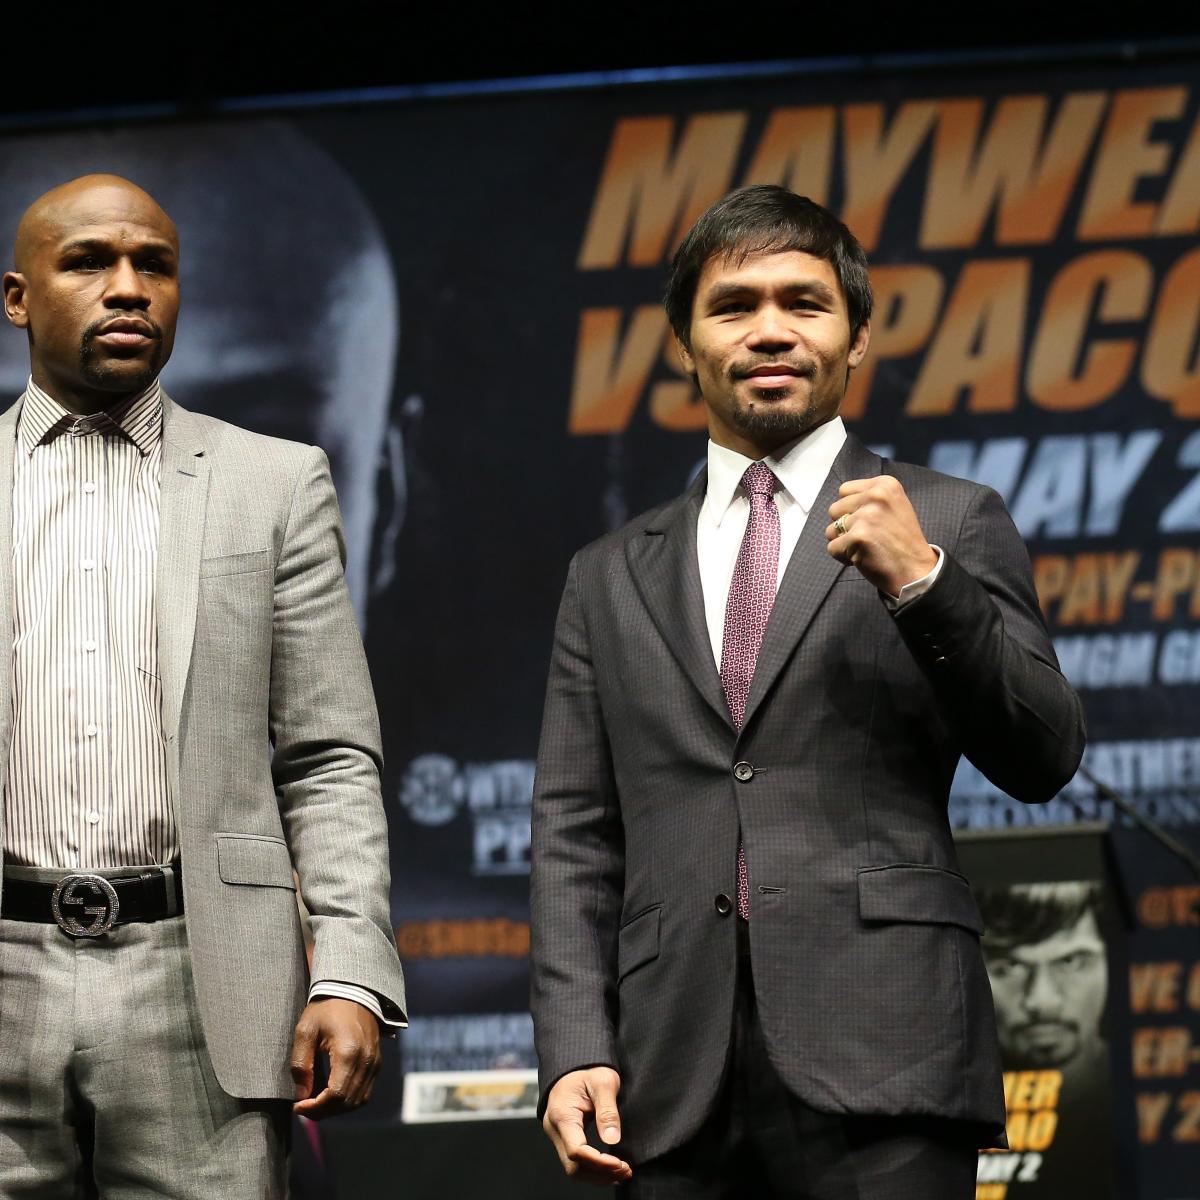 Mayweather vs. Pacquiao: Bob Arum Hints Contract Dispute Puts Fight in Jeopardy